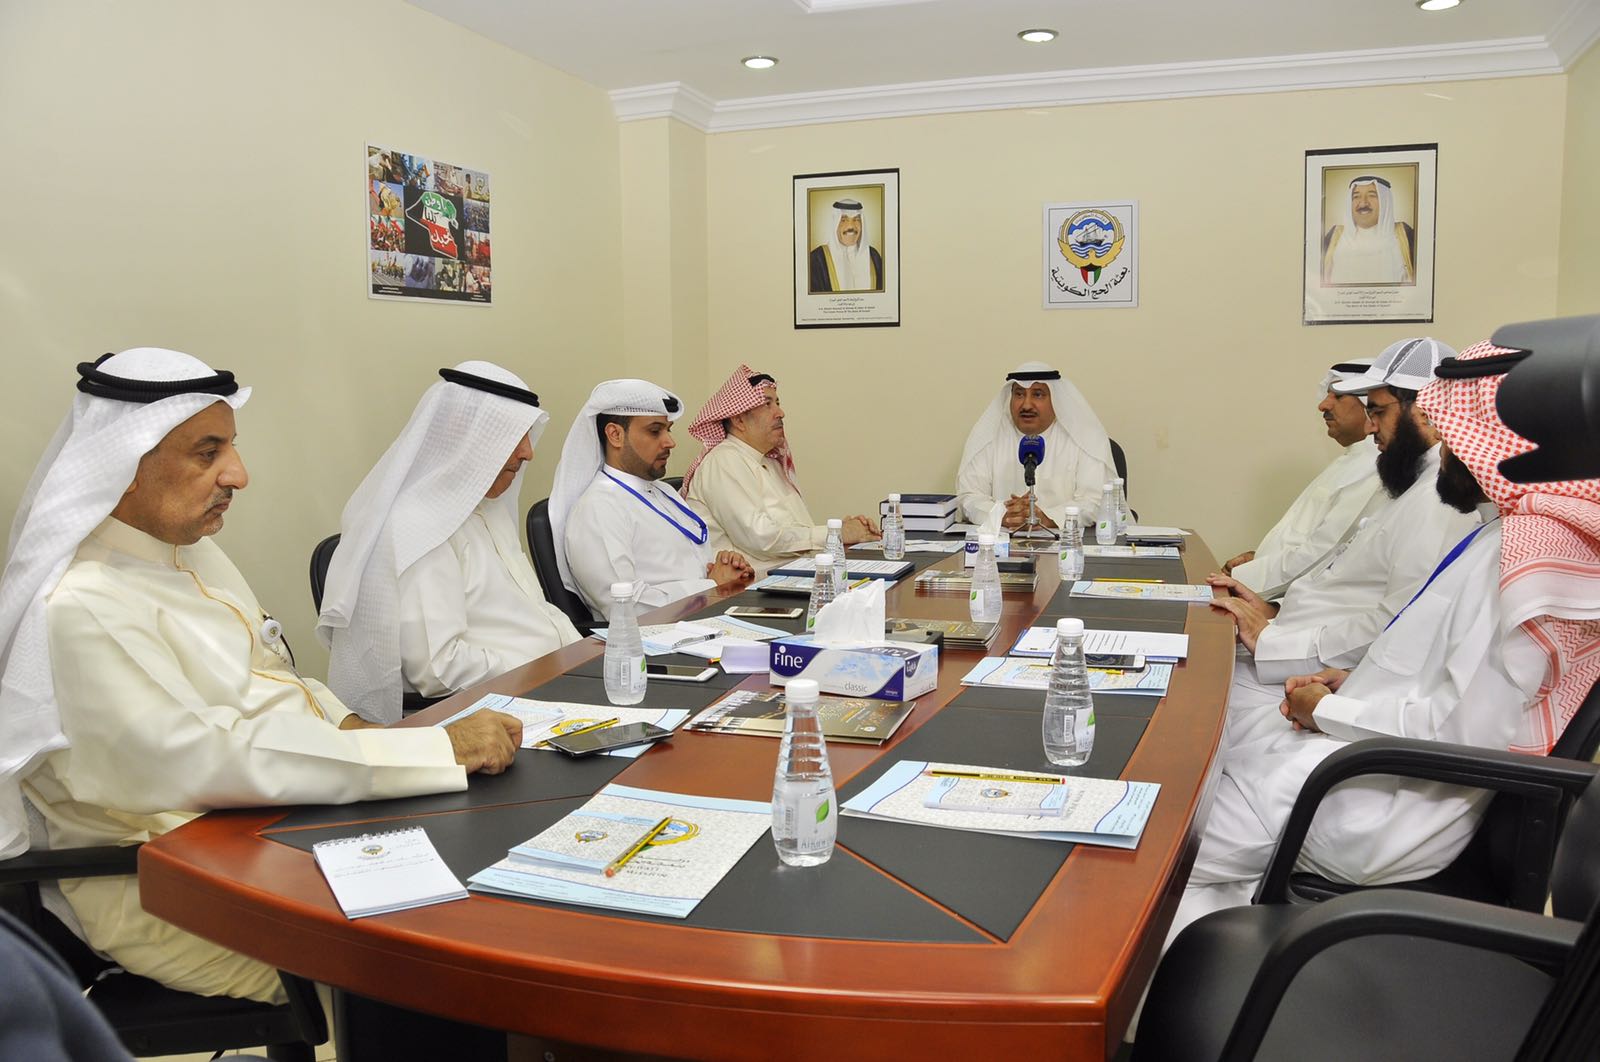 Head of the campaign Khlaif Al-Athena during the meeting with the bodies involved in Kuwait's Hajj campaign